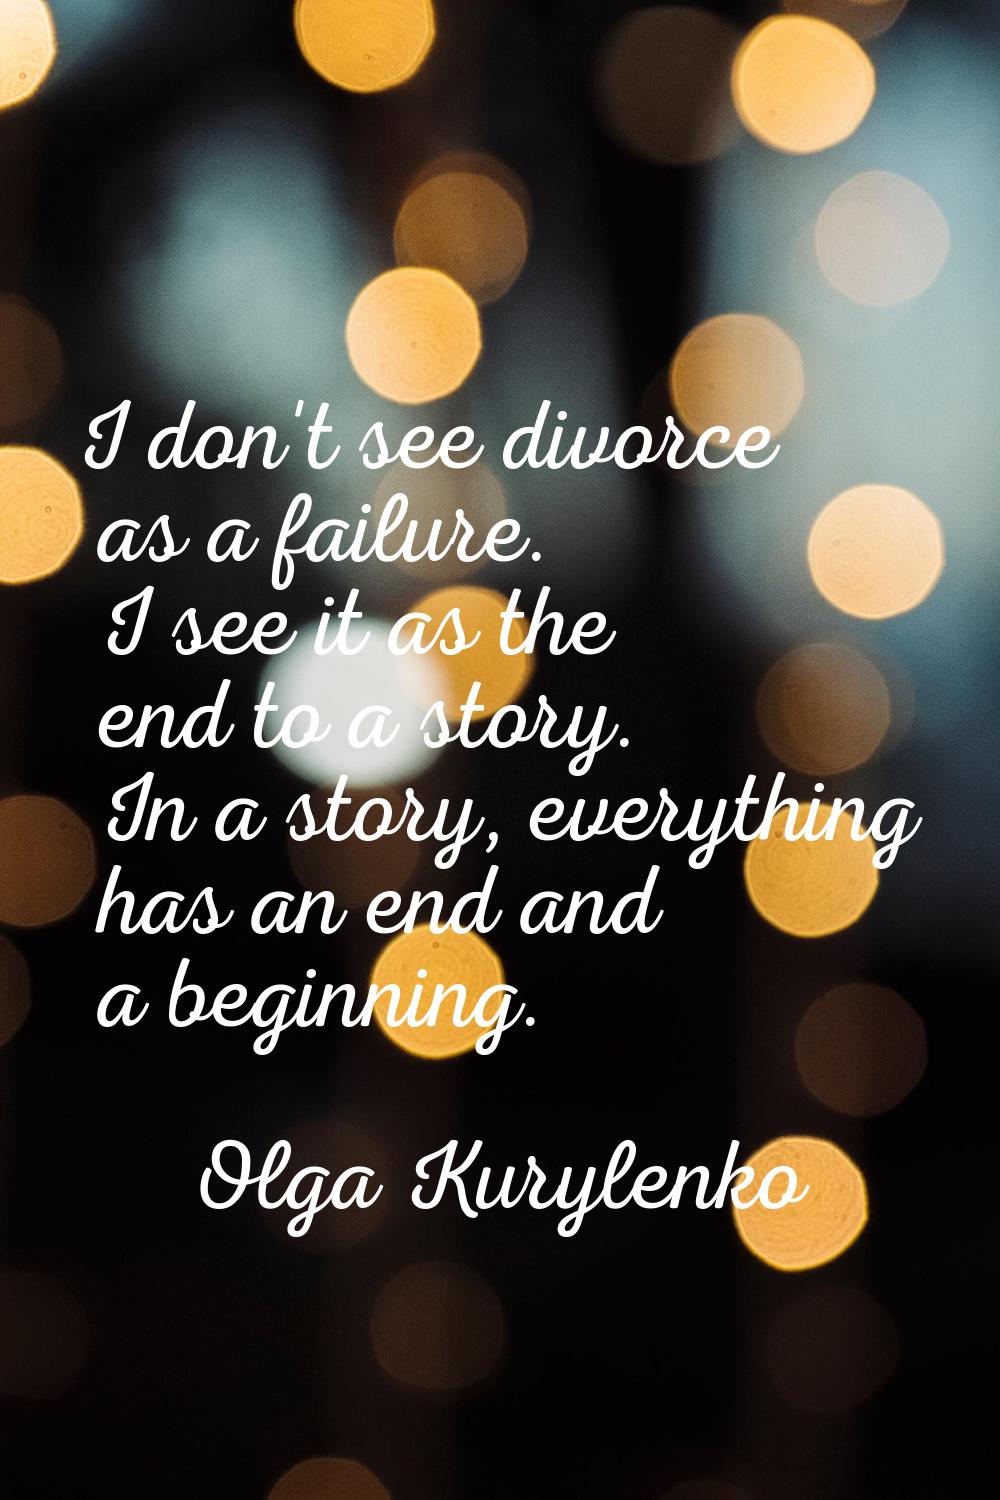 I don't see divorce as a failure. I see it as the end to a story. In a story, everything has an end